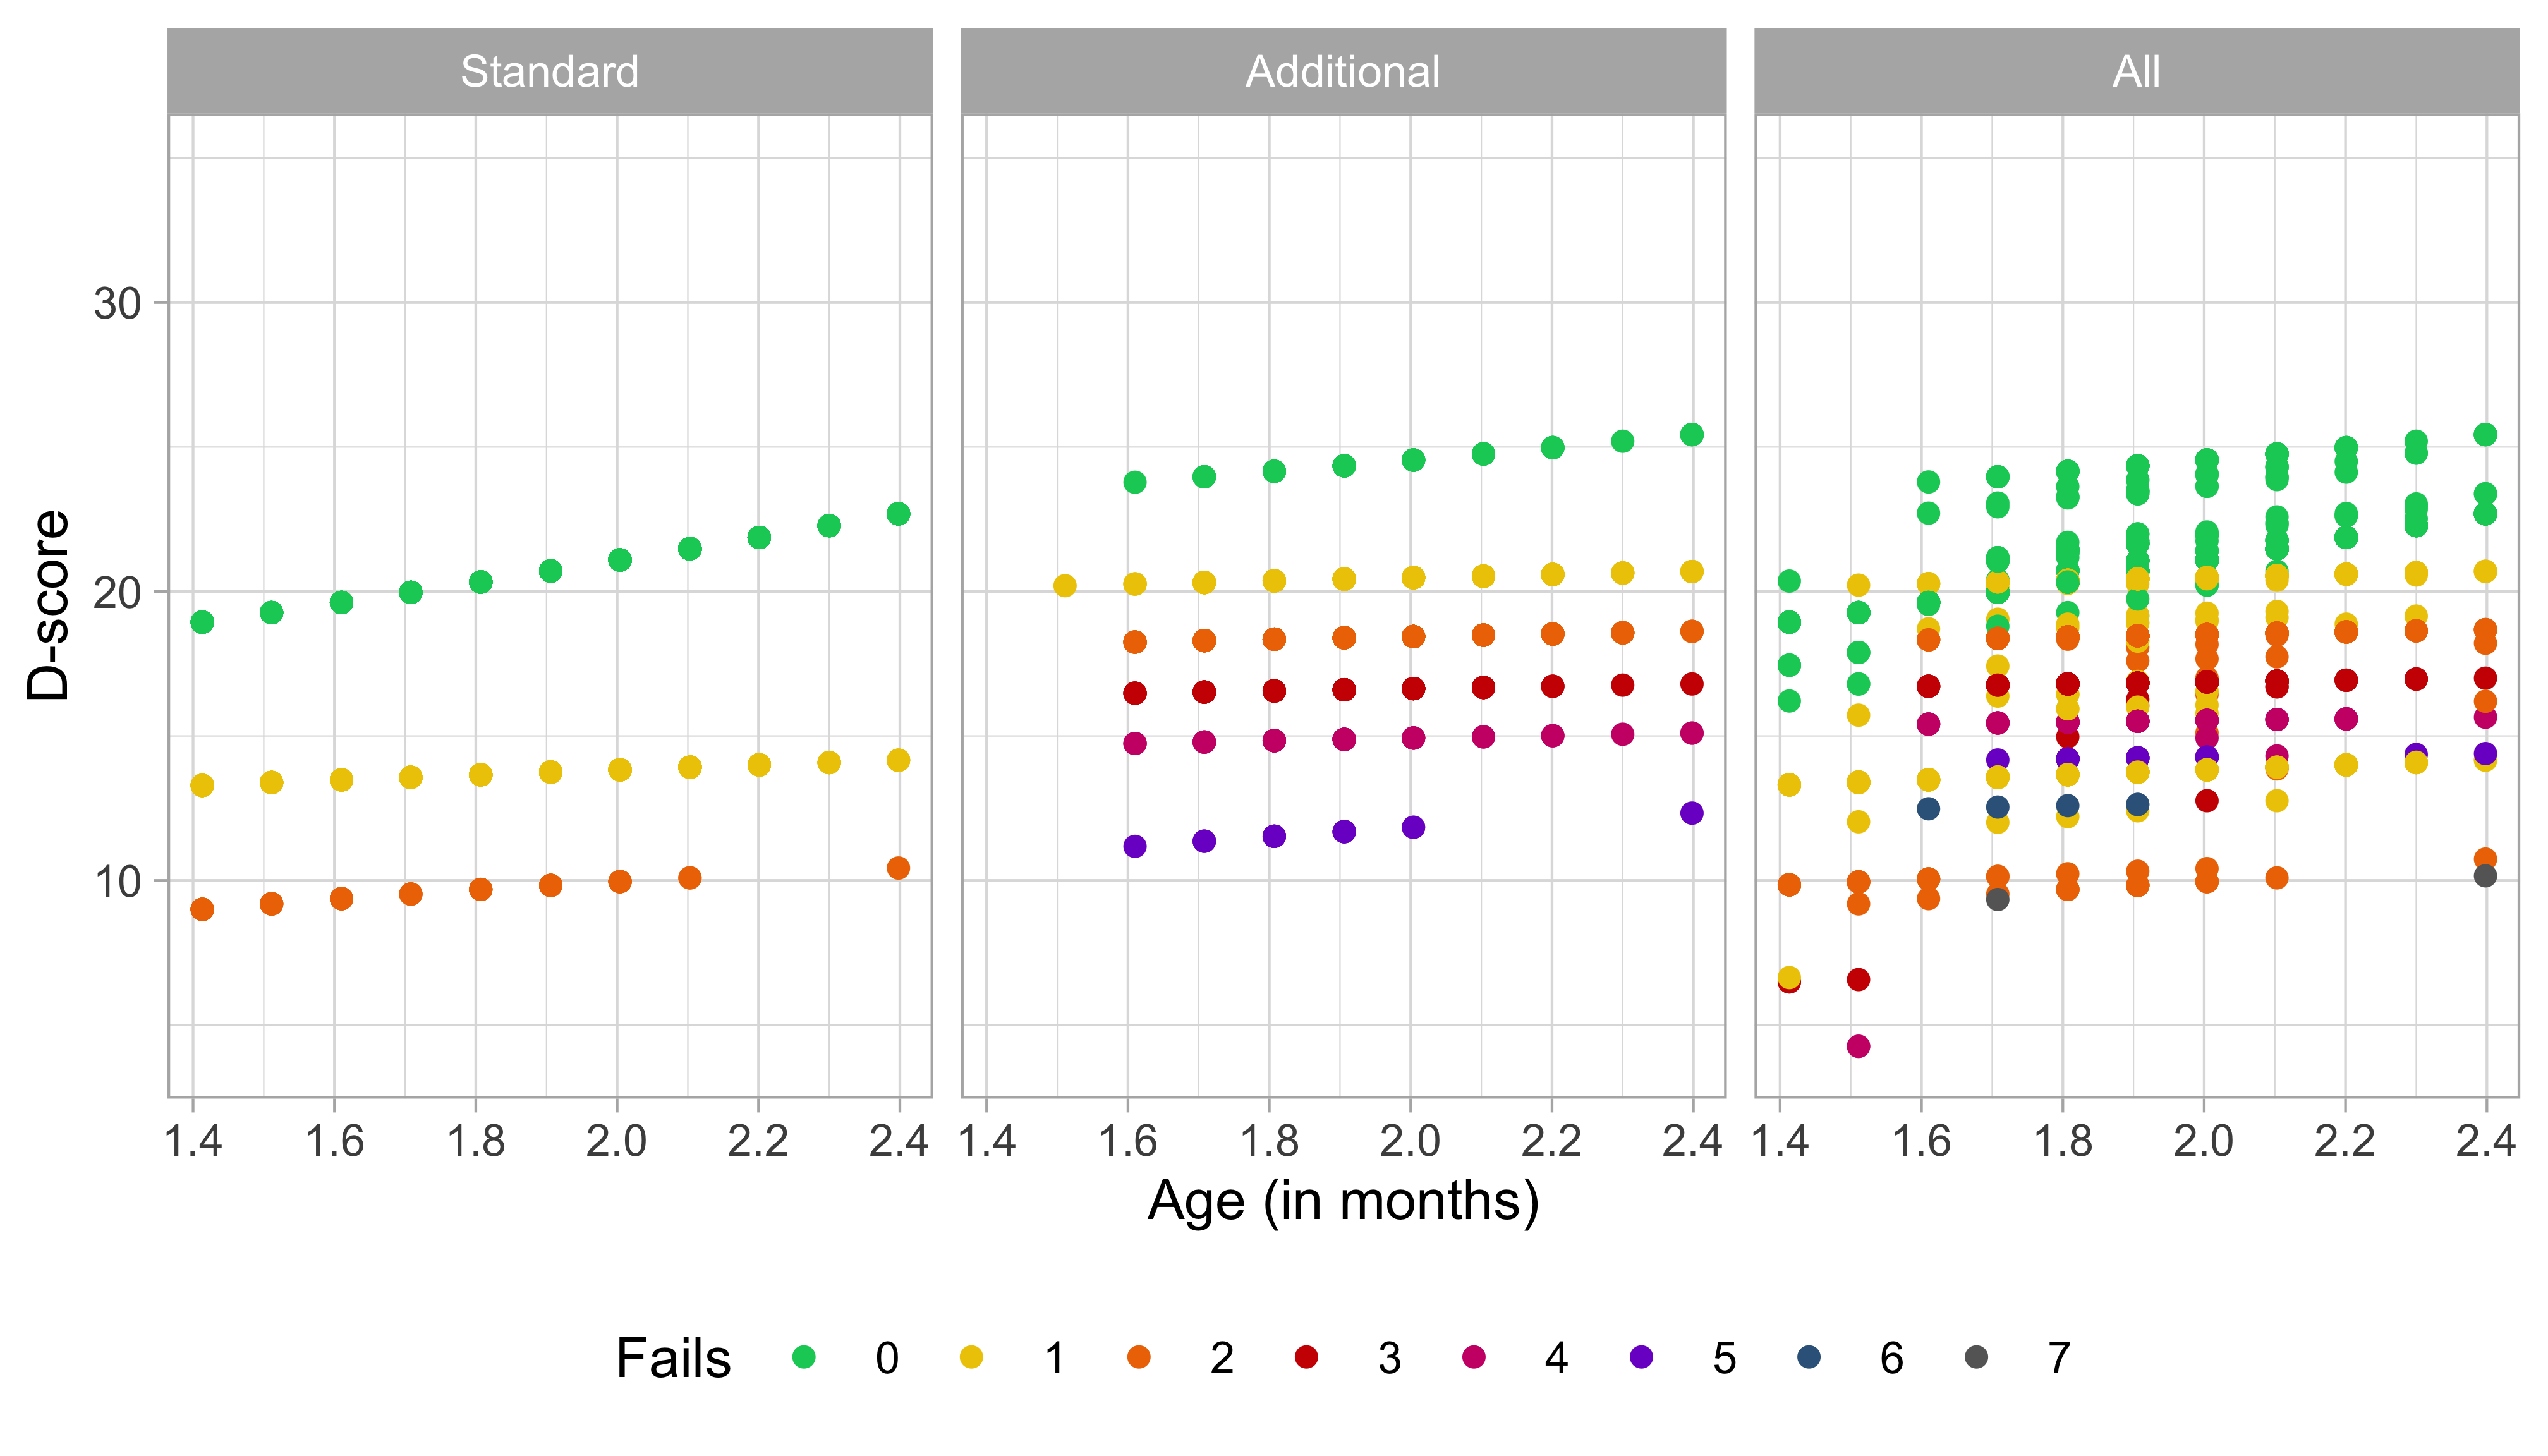 Distribution of the D-scores calculated from the standard, additional and all available milestones at month 2. Colors correspond to the number of fails.